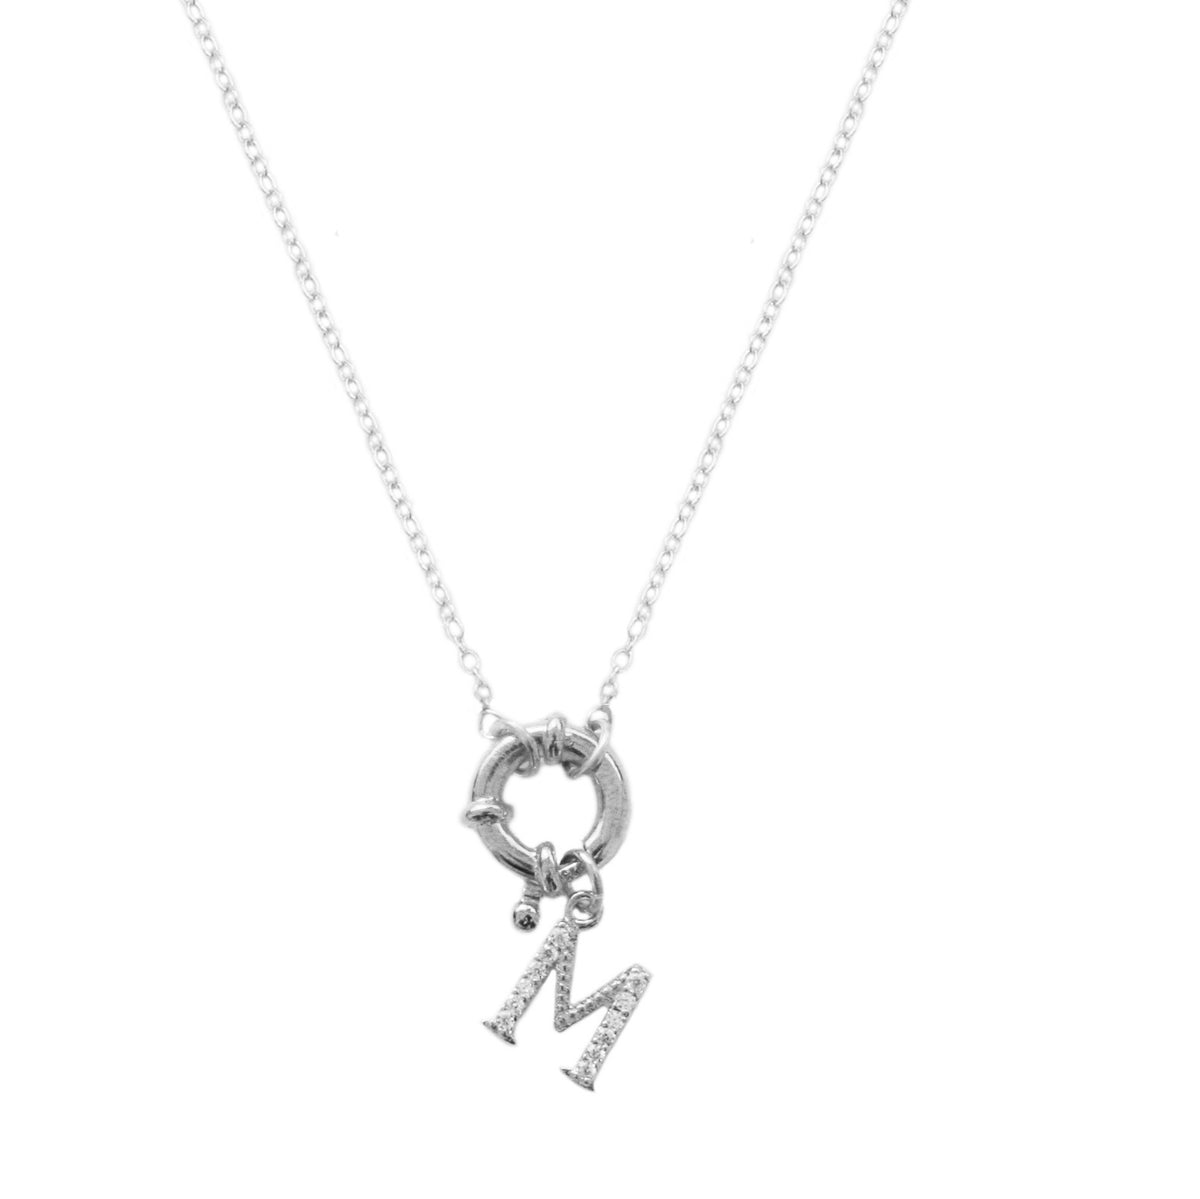 Initial openclose chain silver